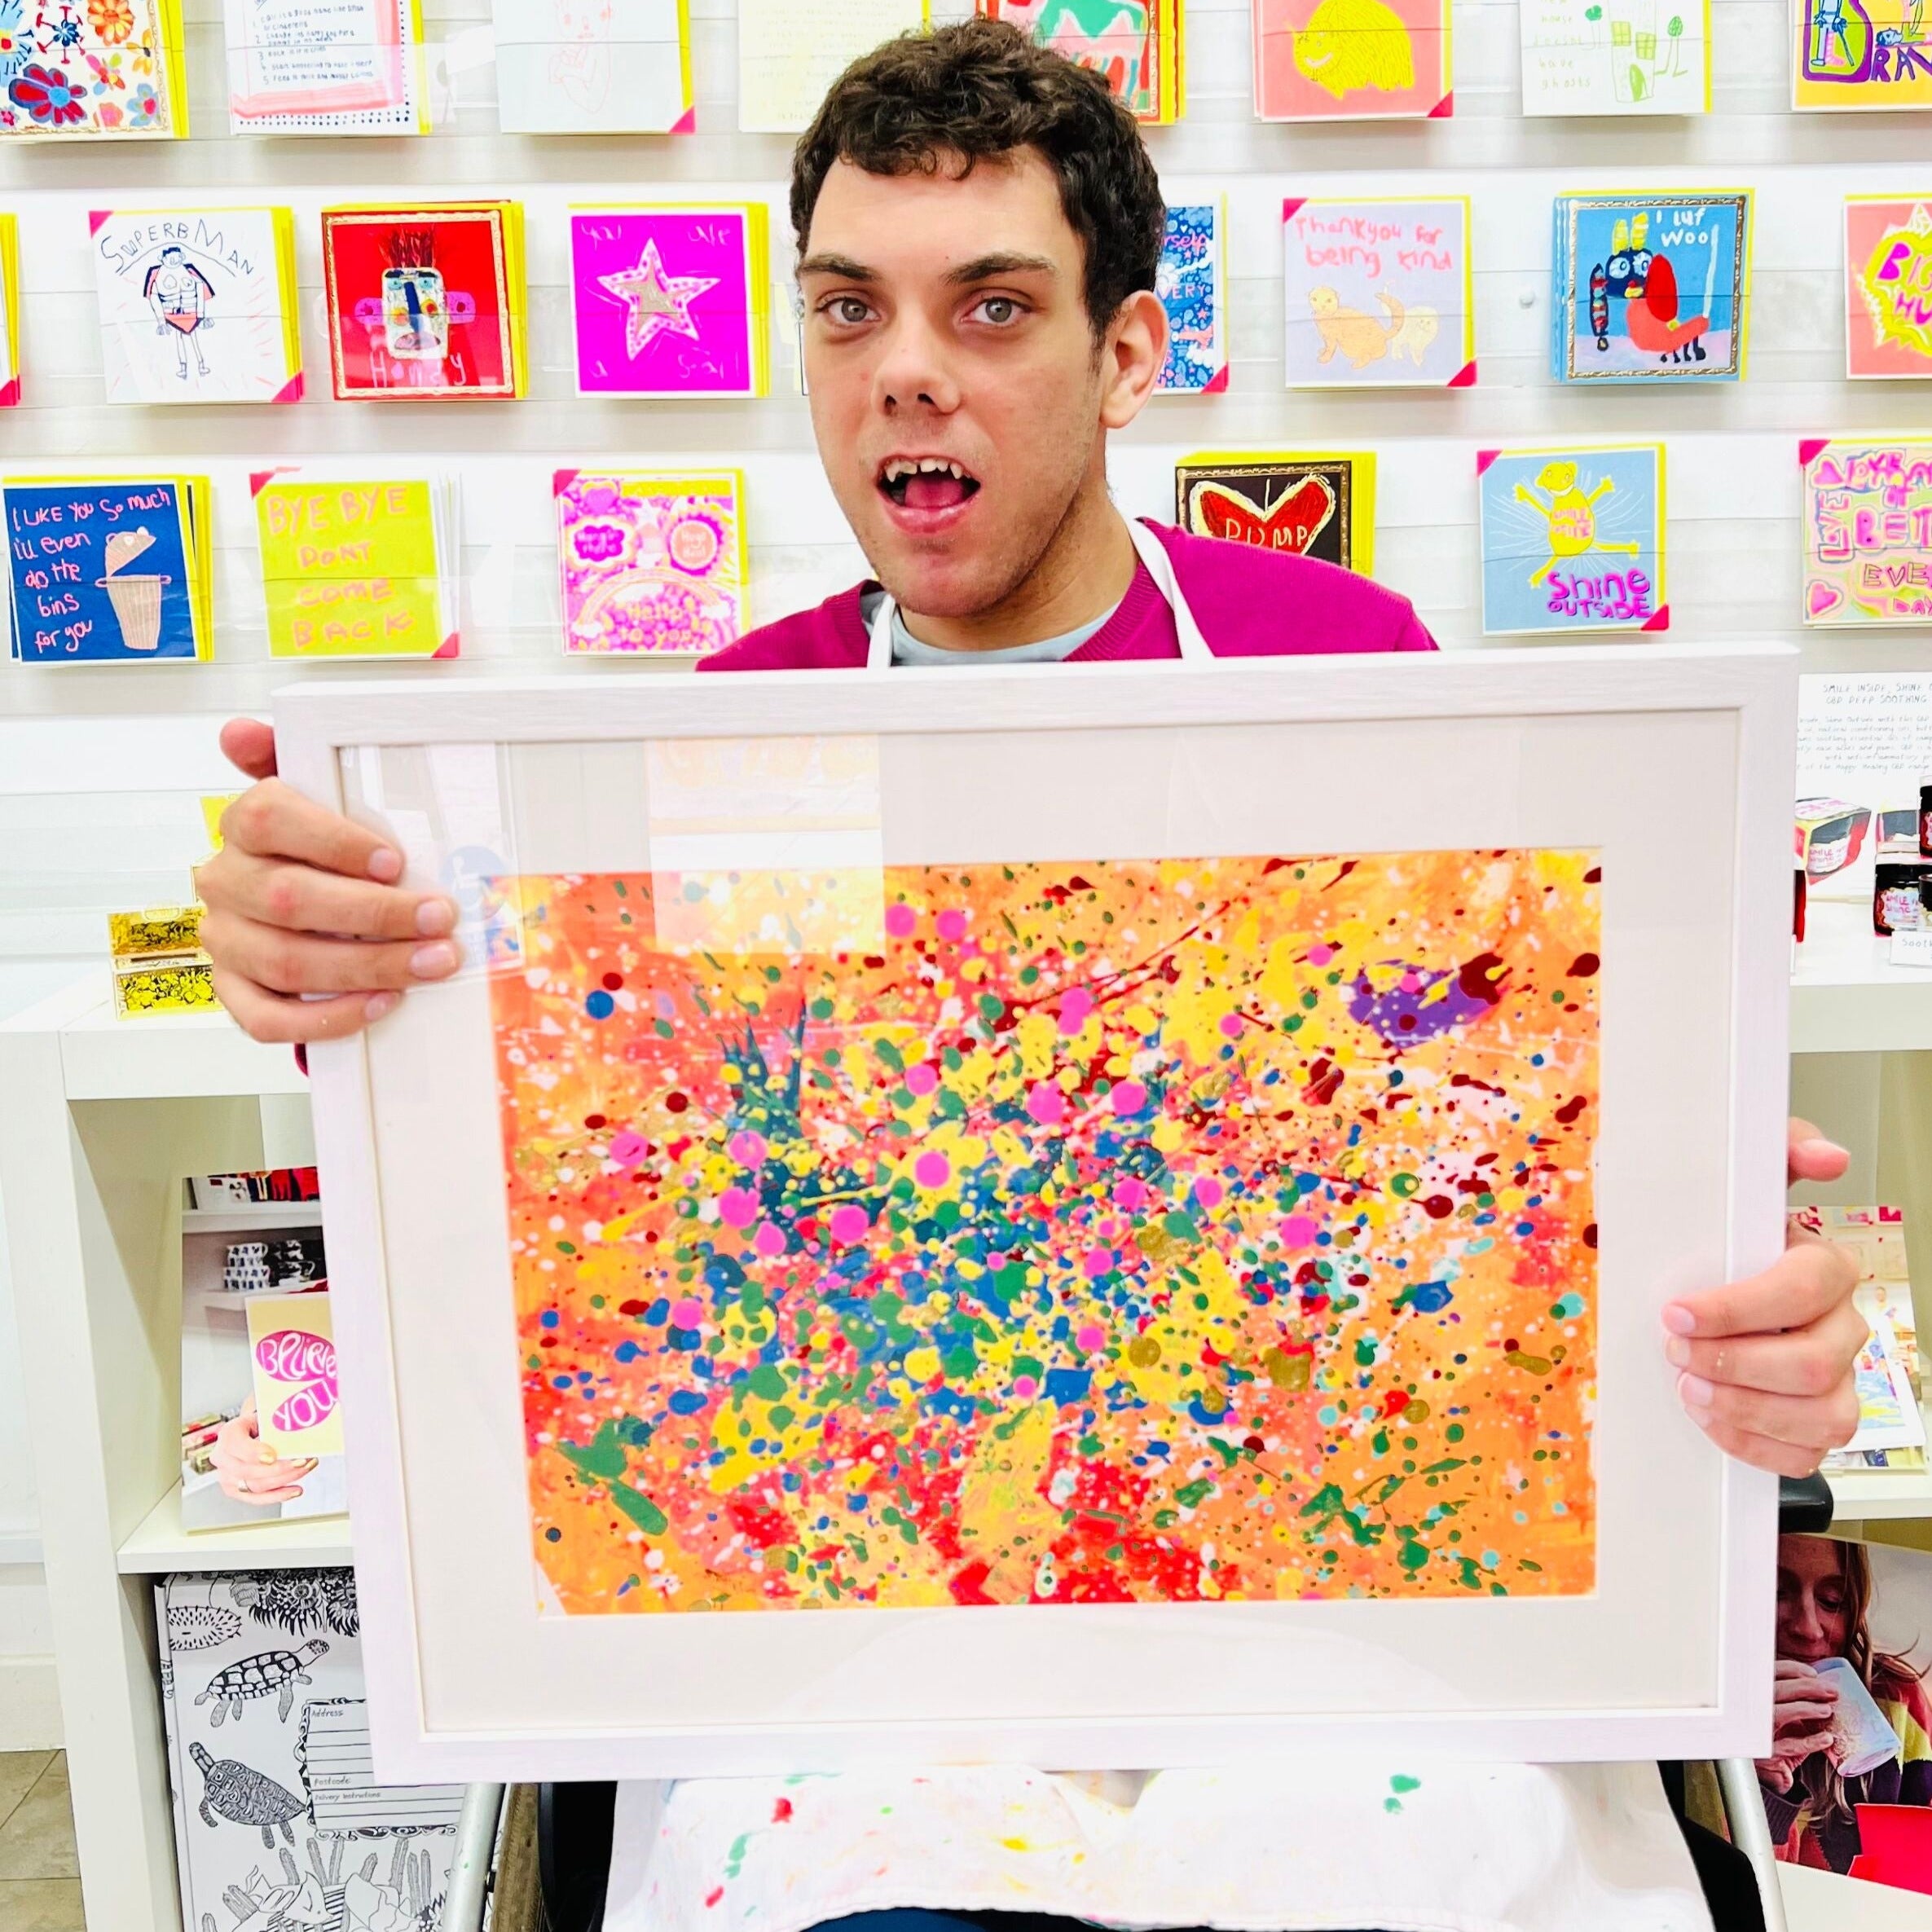 Male artist holding Framed colour painting of pink, orange and yellow splats